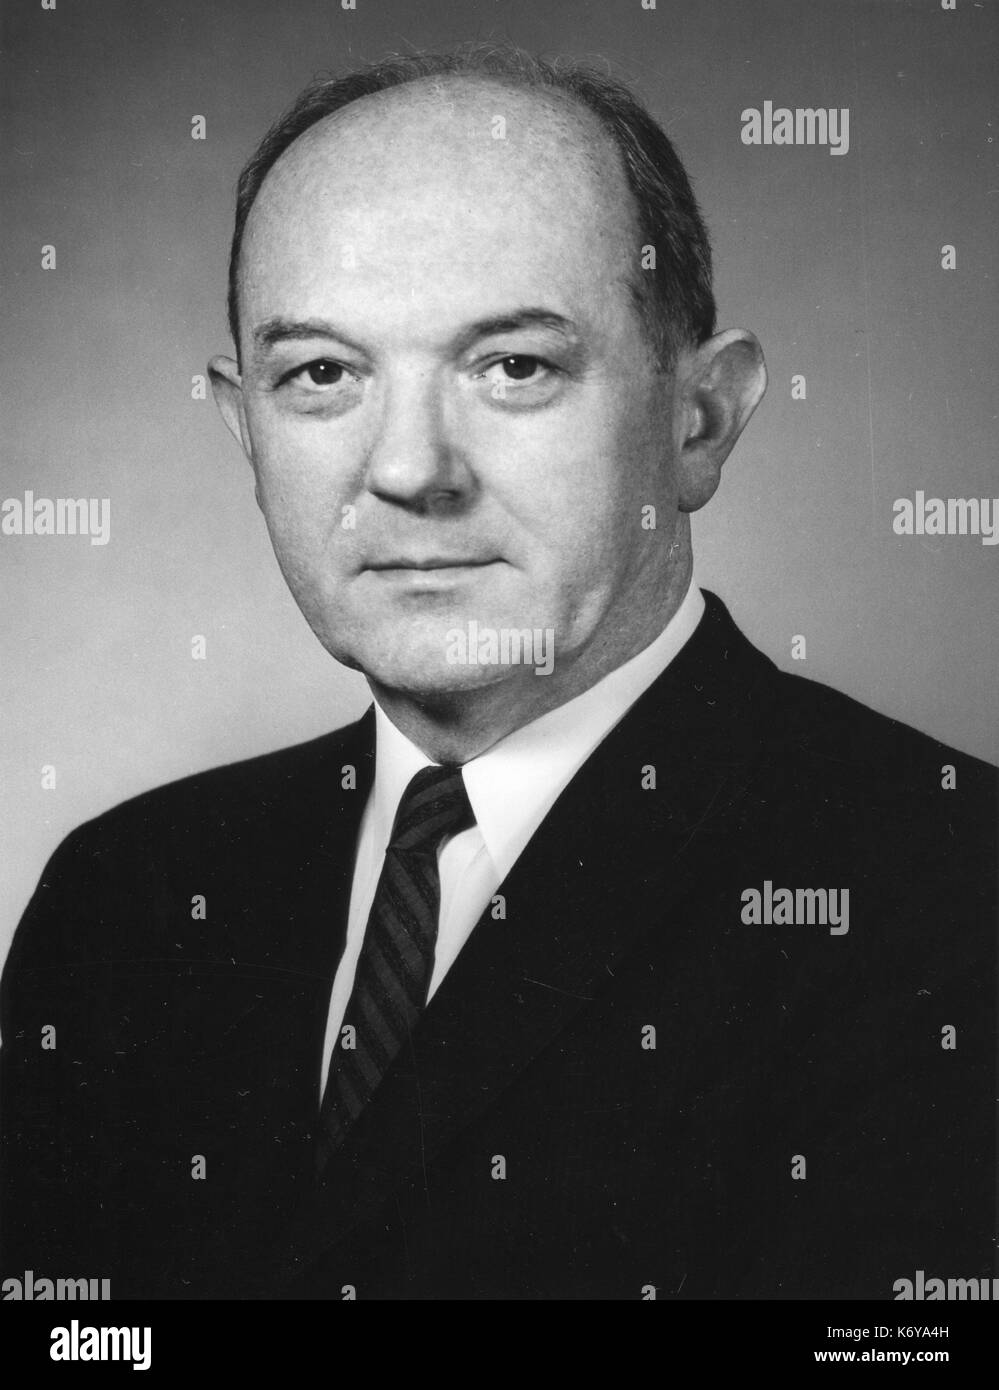 Official portrait of US Secretary of State Dean Rusk. Washington, DC, 1965. Stock Photo